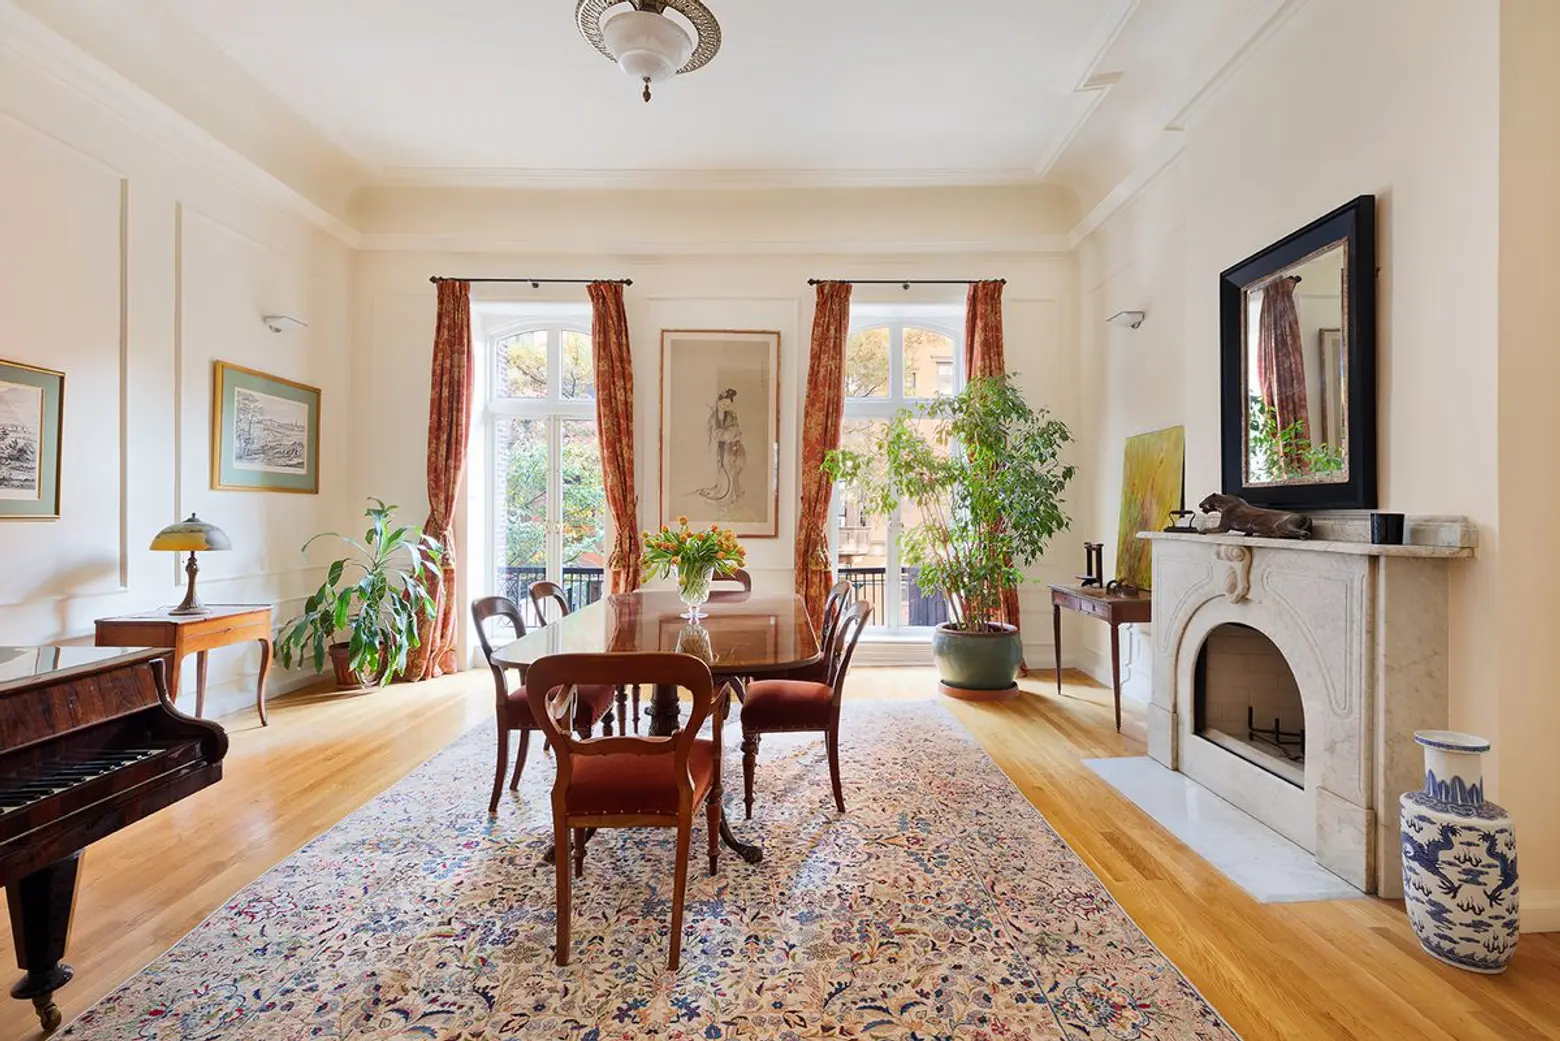 Asking $15M, one of the last Gramercy Park townhouses comes with keys to the park